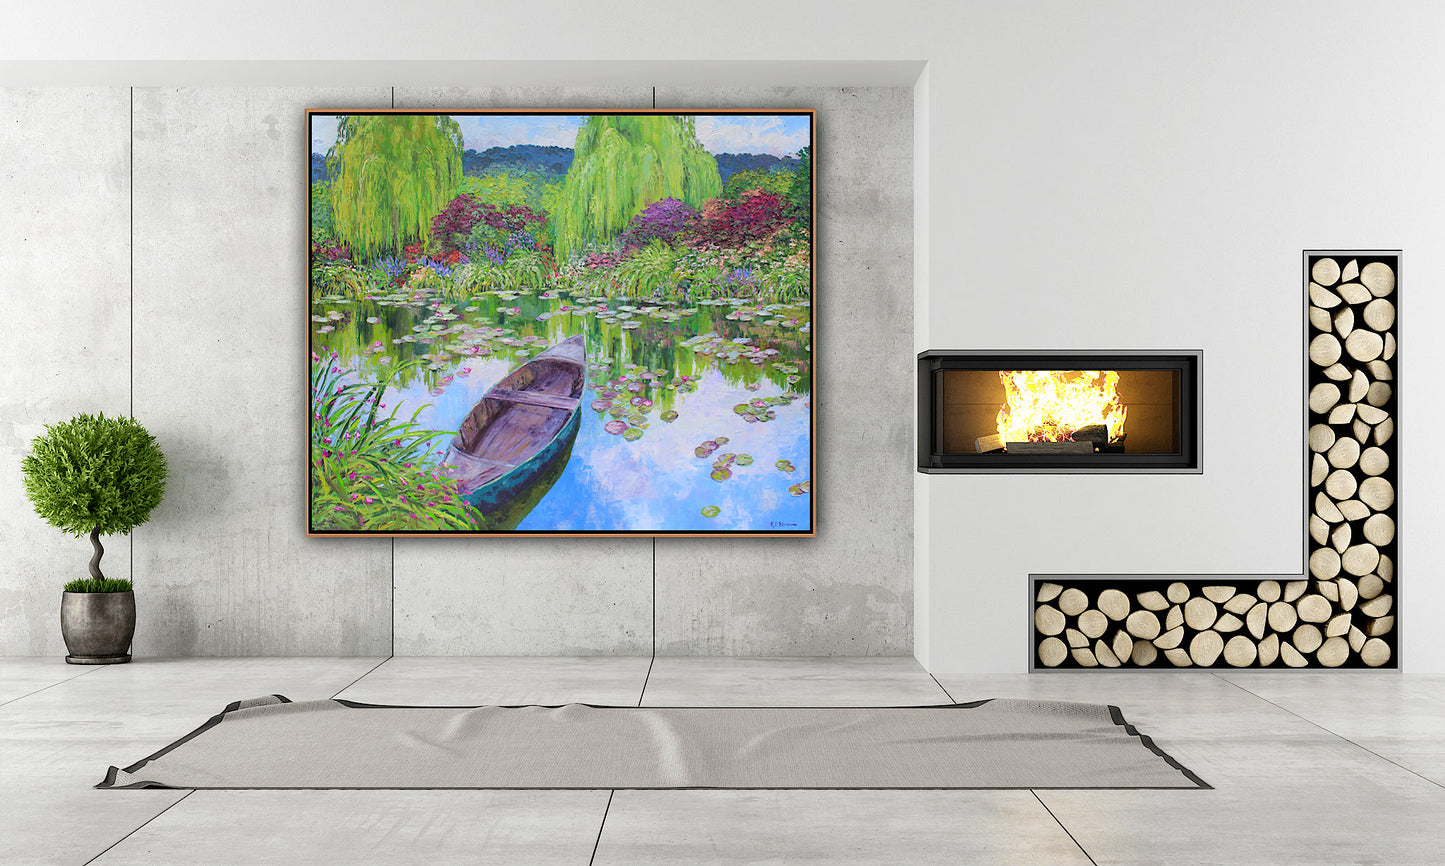 The Norwegian boat At Giverny,  Extra Large 50" x 60" Garden Landscape Of Monet's Waterlily Pond, Oil On Canvas